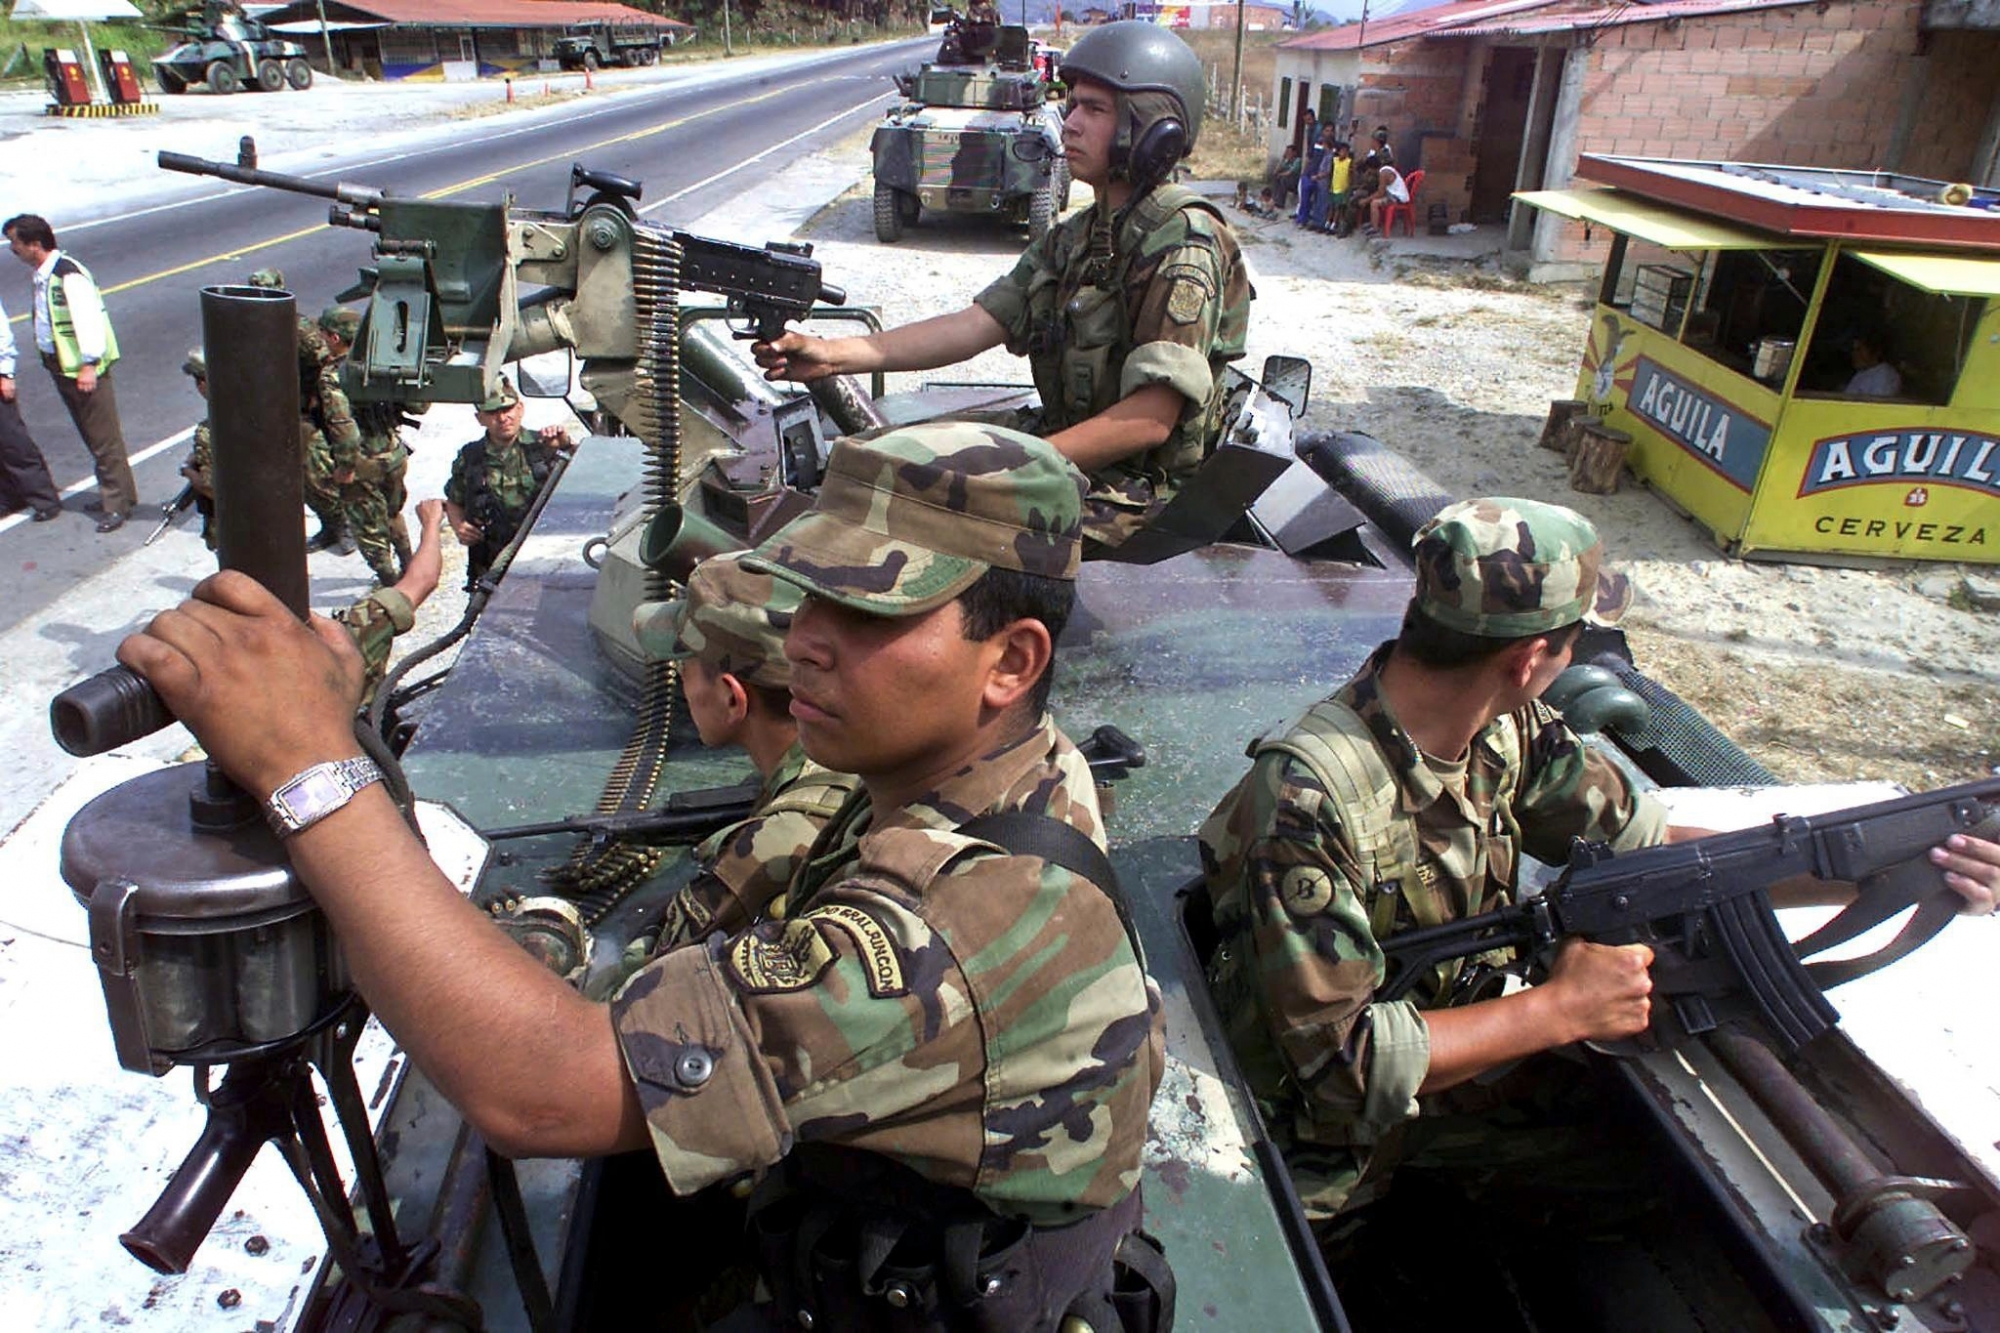 Colombian army soldiers guard 28 February, 2002, the road leading to Puente Quetame, 70kms from Bogota after reports that earlier in the day army troops had clashed with rebels from the Revolutionary Armed Forces of Colombia (FARC). The Colombian government has granted the army extended authority, including control of public safety, in six departments nationwide to counter the recent wave of rebel attacks, Defense Minister Gustavo Bell announced Thursday. The statement comes as guerrillas strike power lines on the border with Venezuela, leaving an oil-producing region in the dark, and Colombia's top military brass claims devastating casualties following aerial bombardment on rebel targets.   AFP PHOTO/Rodrigo ARANGUA COLOMBIA-OFFENSIVE-ARMY